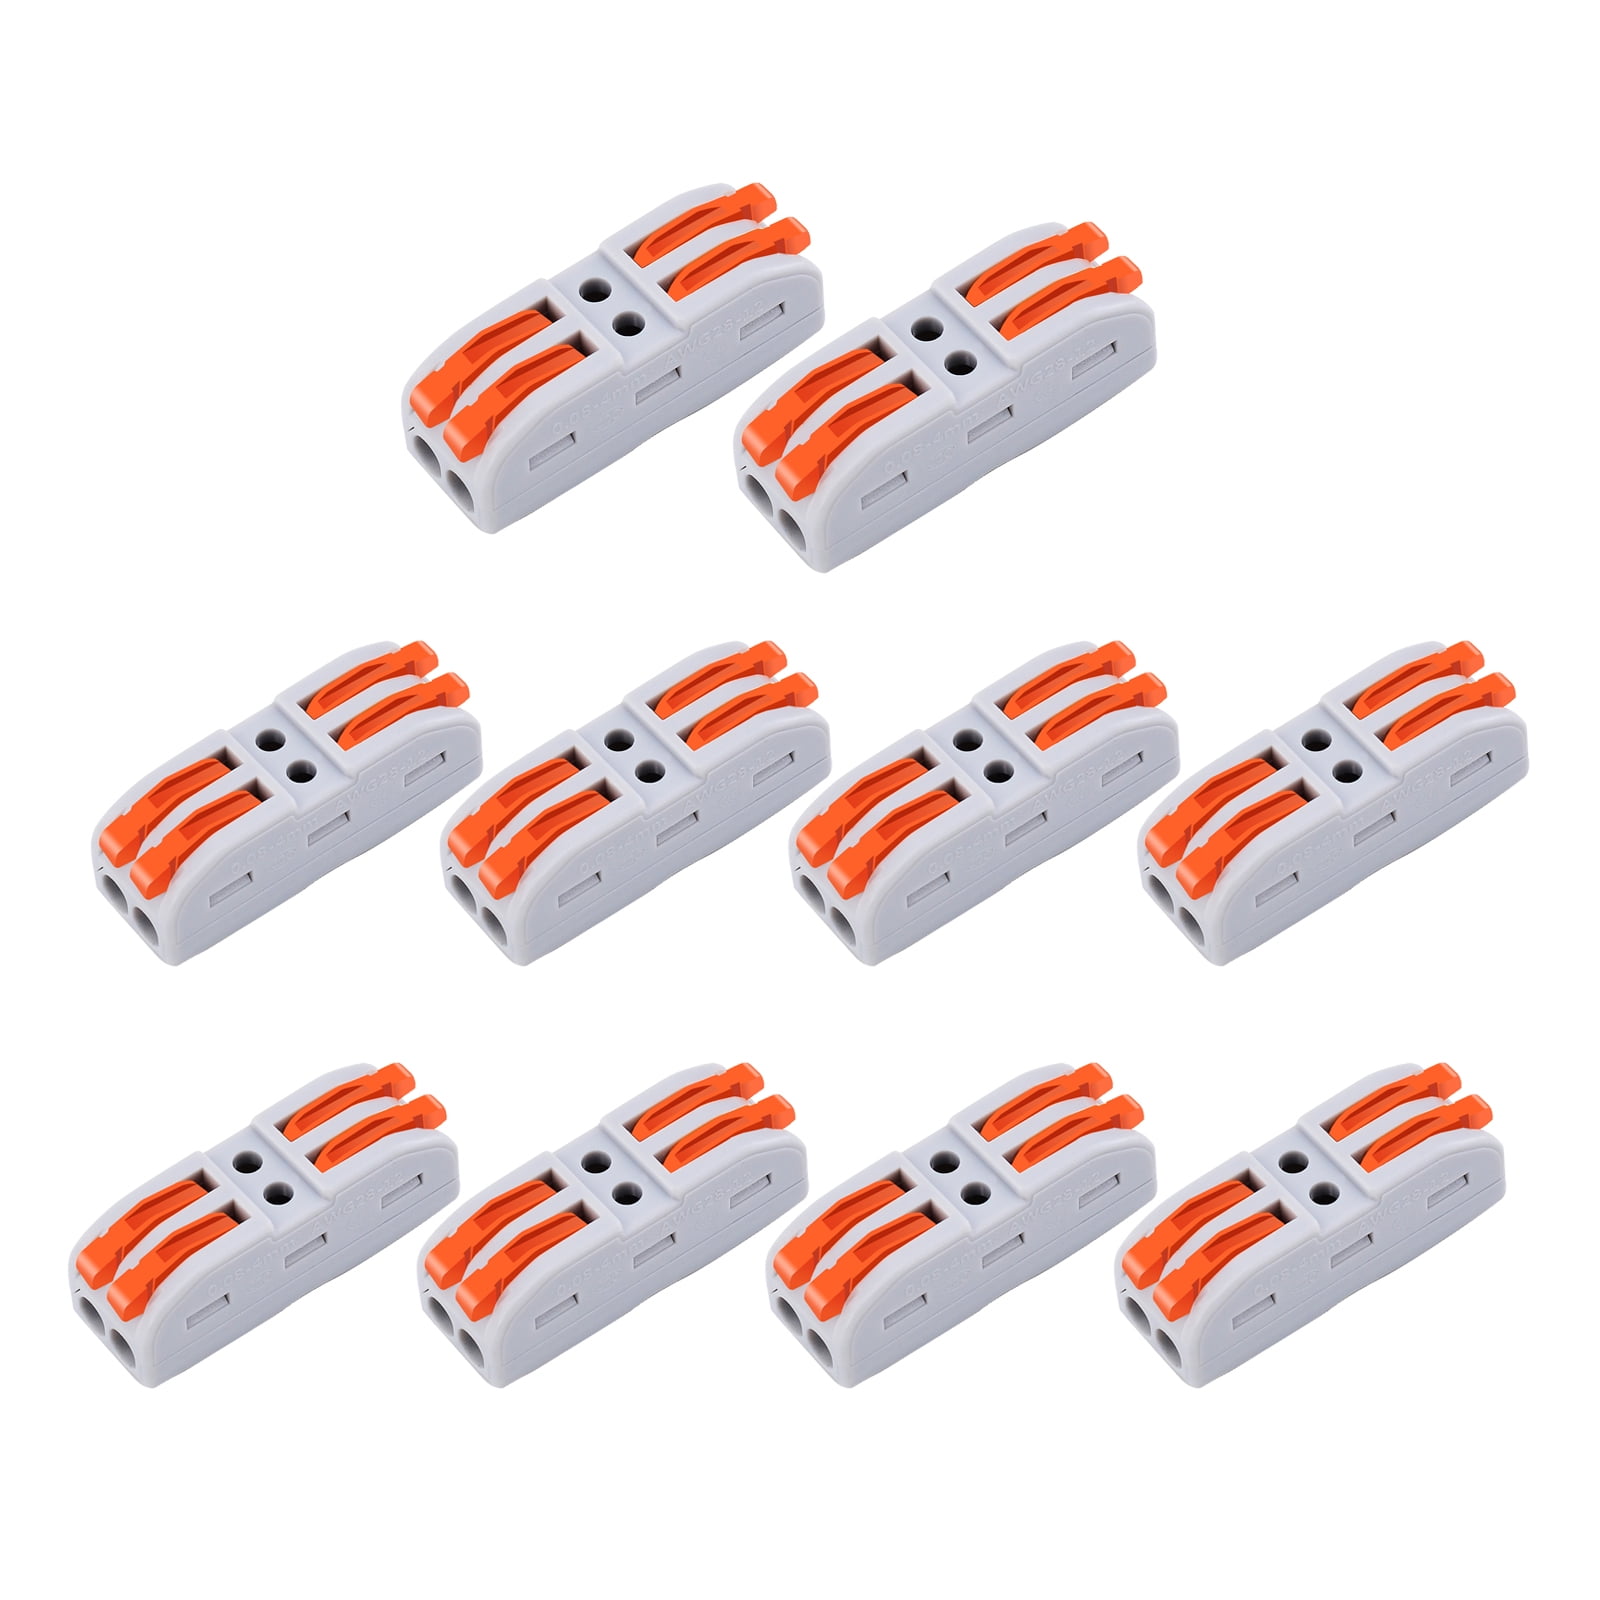 10pcs 5Way Lever Nuts Conductor Splicing Electric Cable Connector Terminal Block 